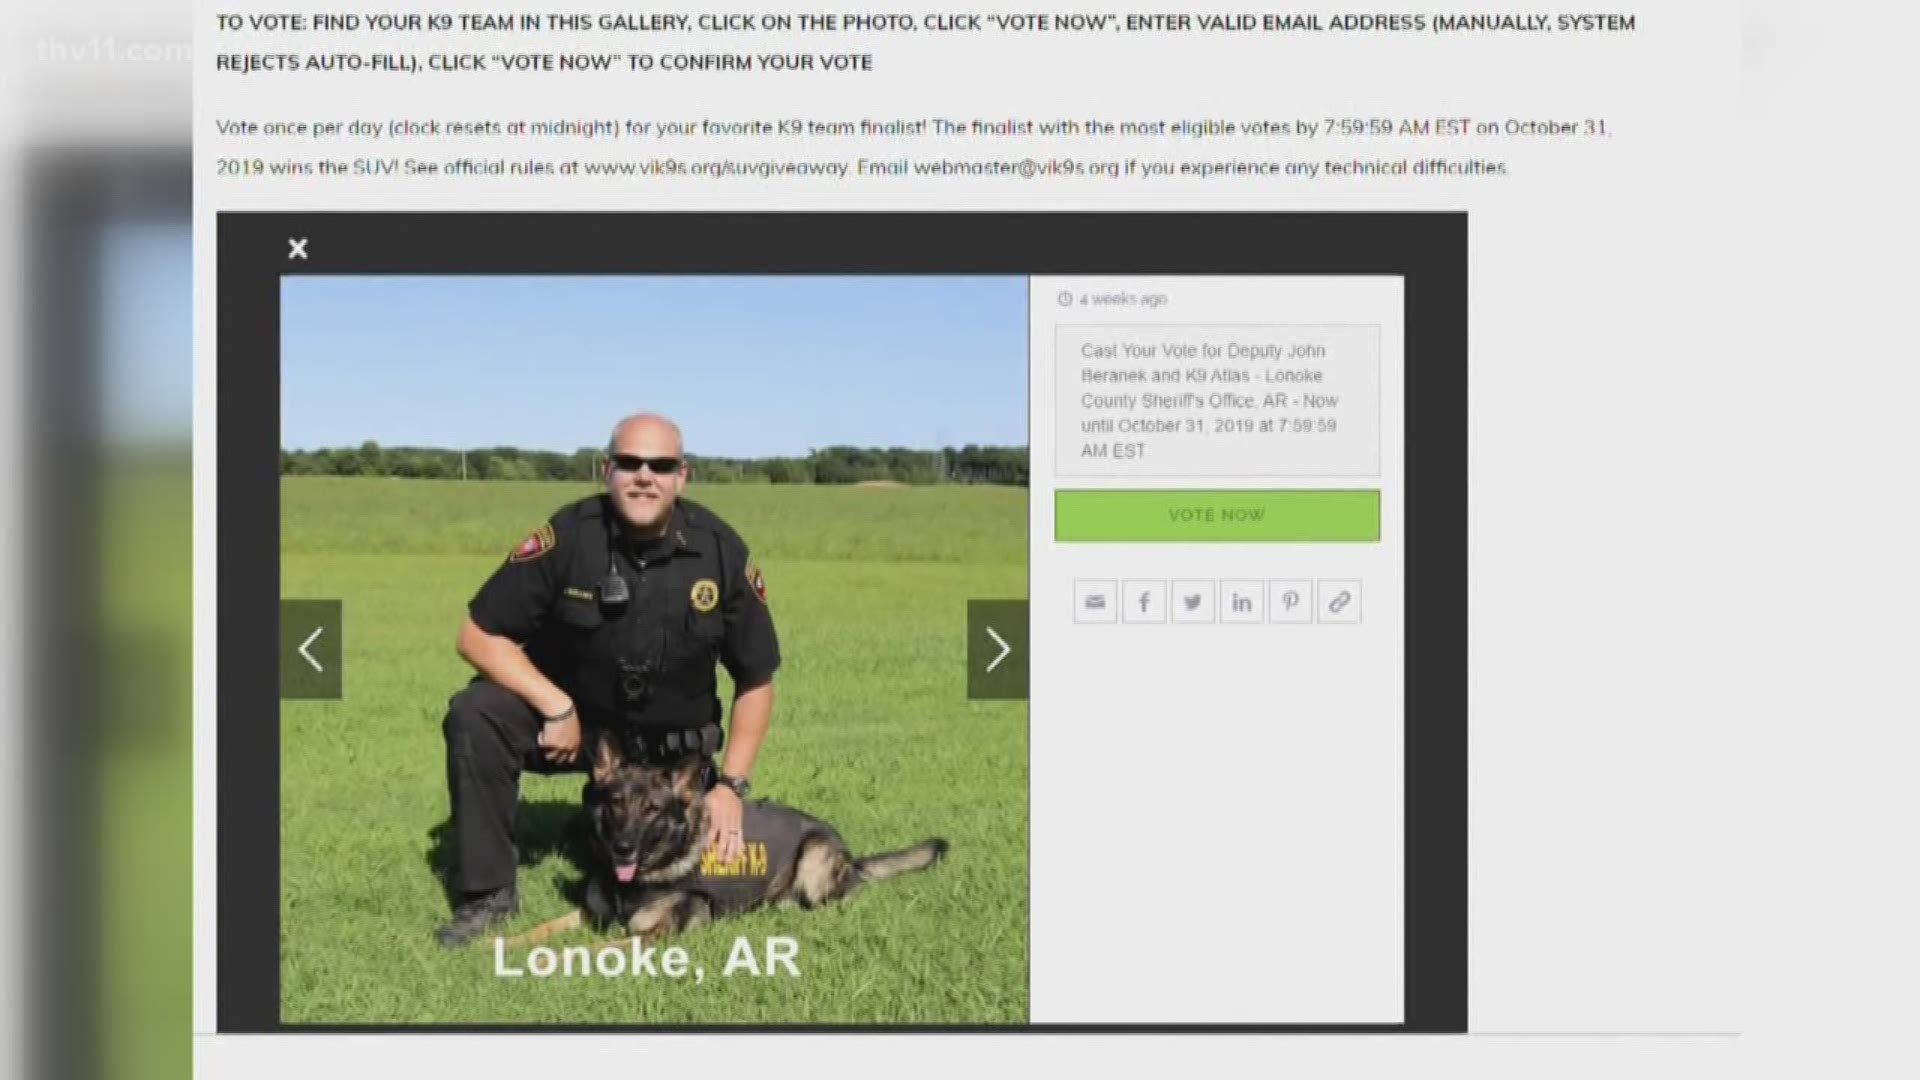 The Lonoke County Sheriff's Office has a pretty opportunity to win a police car for it's K-9 unit.